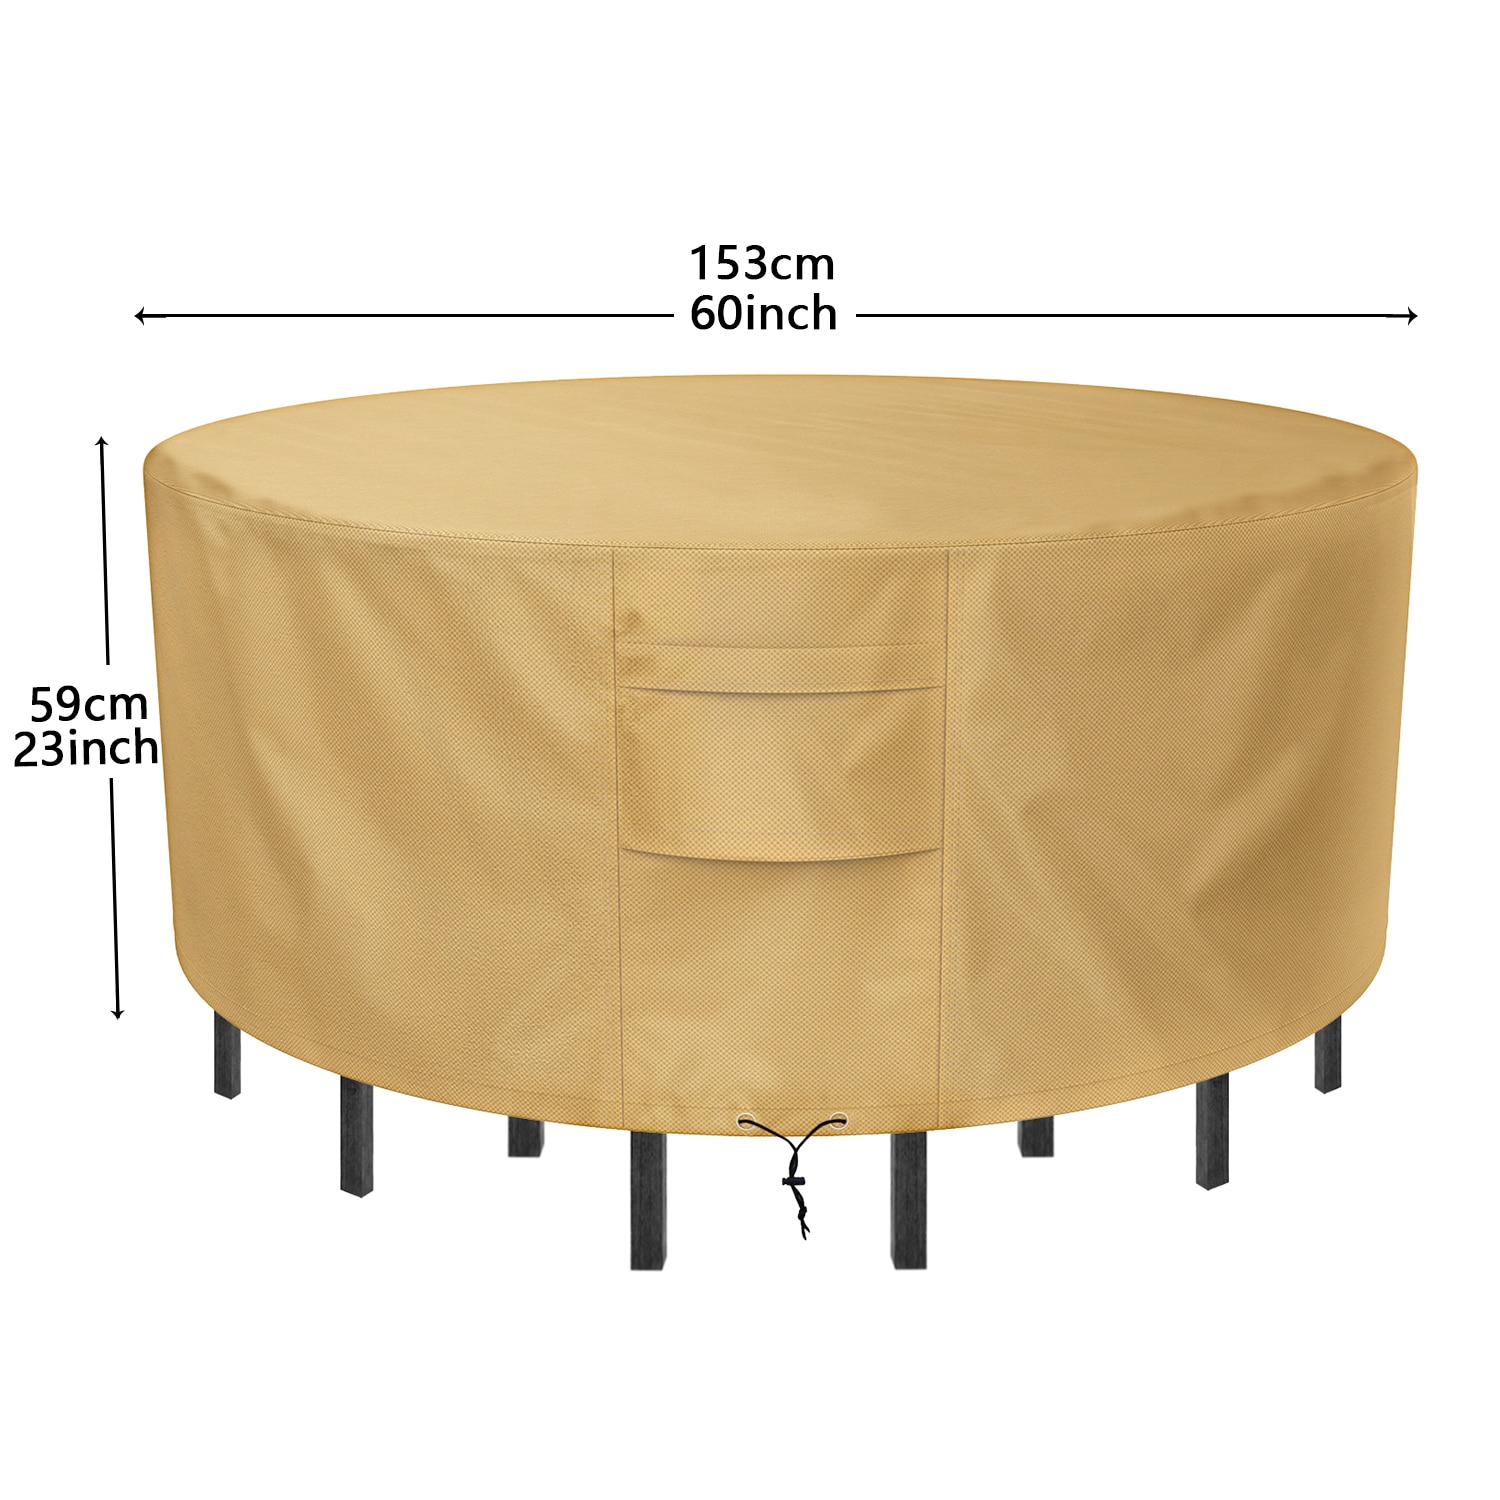 Us 3279 20 Offranton Sunkorto Patio Table Cover Waterproof Wear Resistant Patio Furniture Chair Covers 60 Inch Diameter Light Brown In Tablecloths pertaining to measurements 1500 X 1500